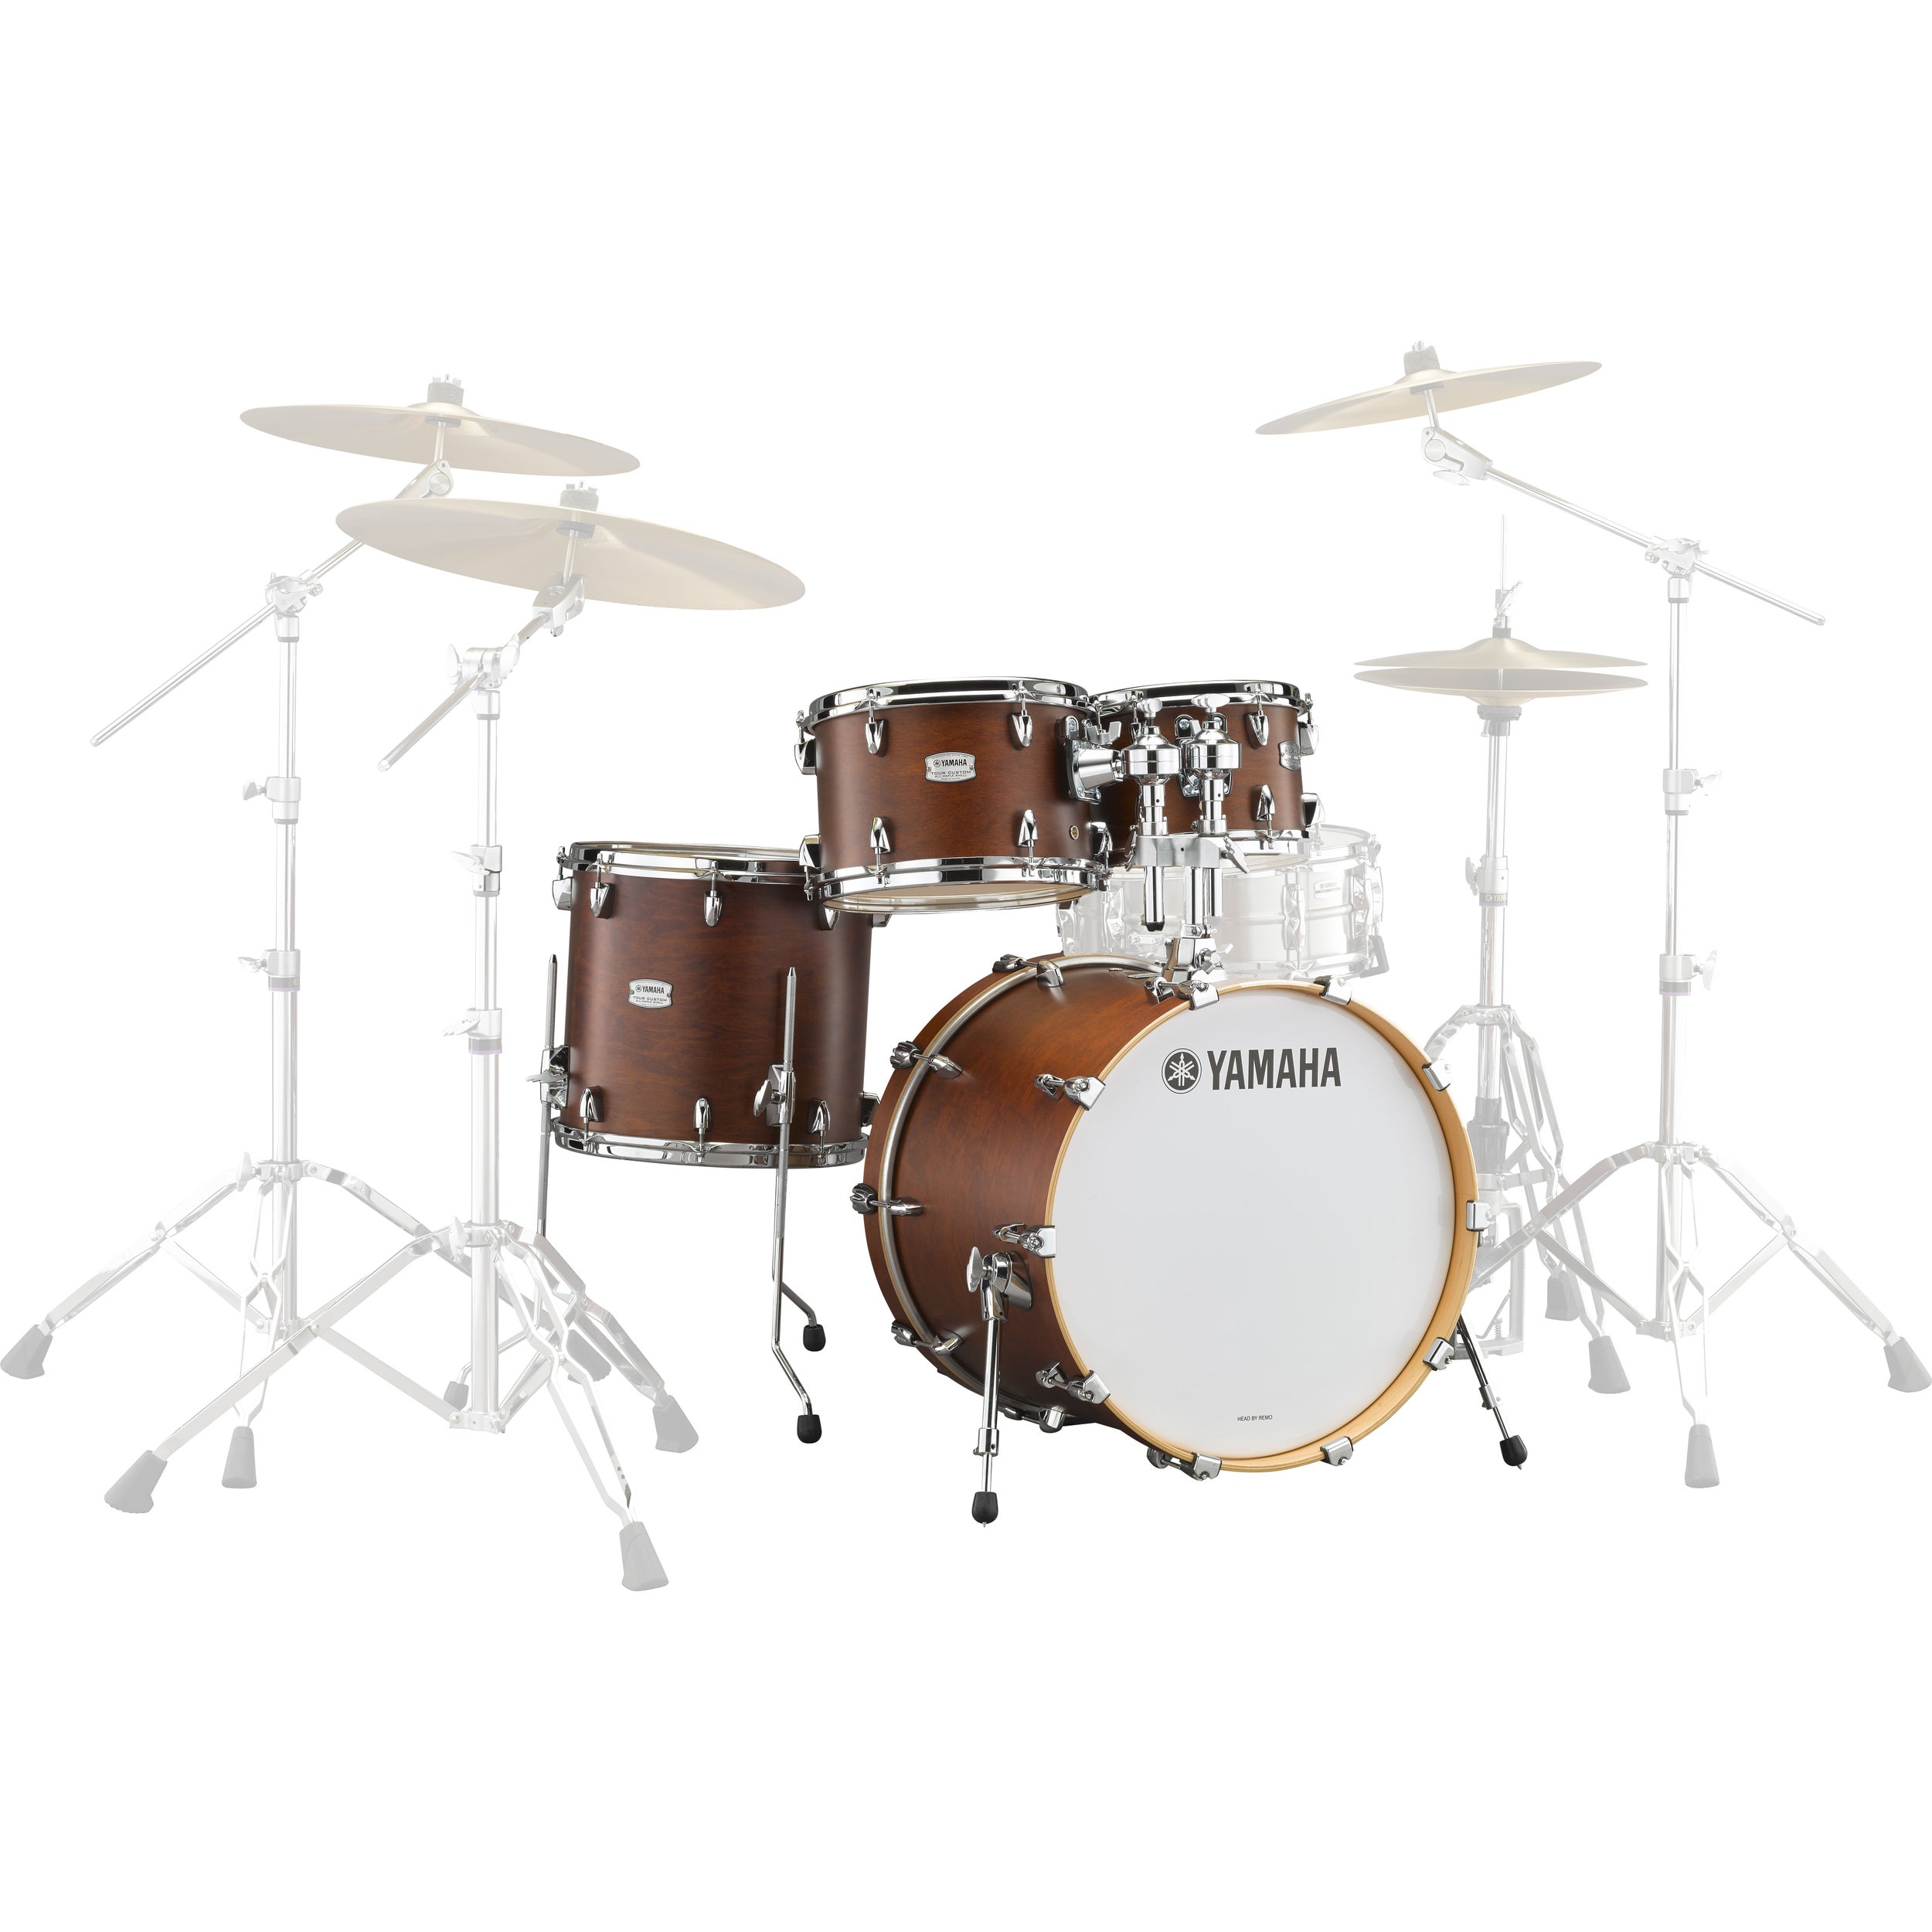 Tour Custom Snare Drums - Overview - Snare Drums - Acoustic Drums